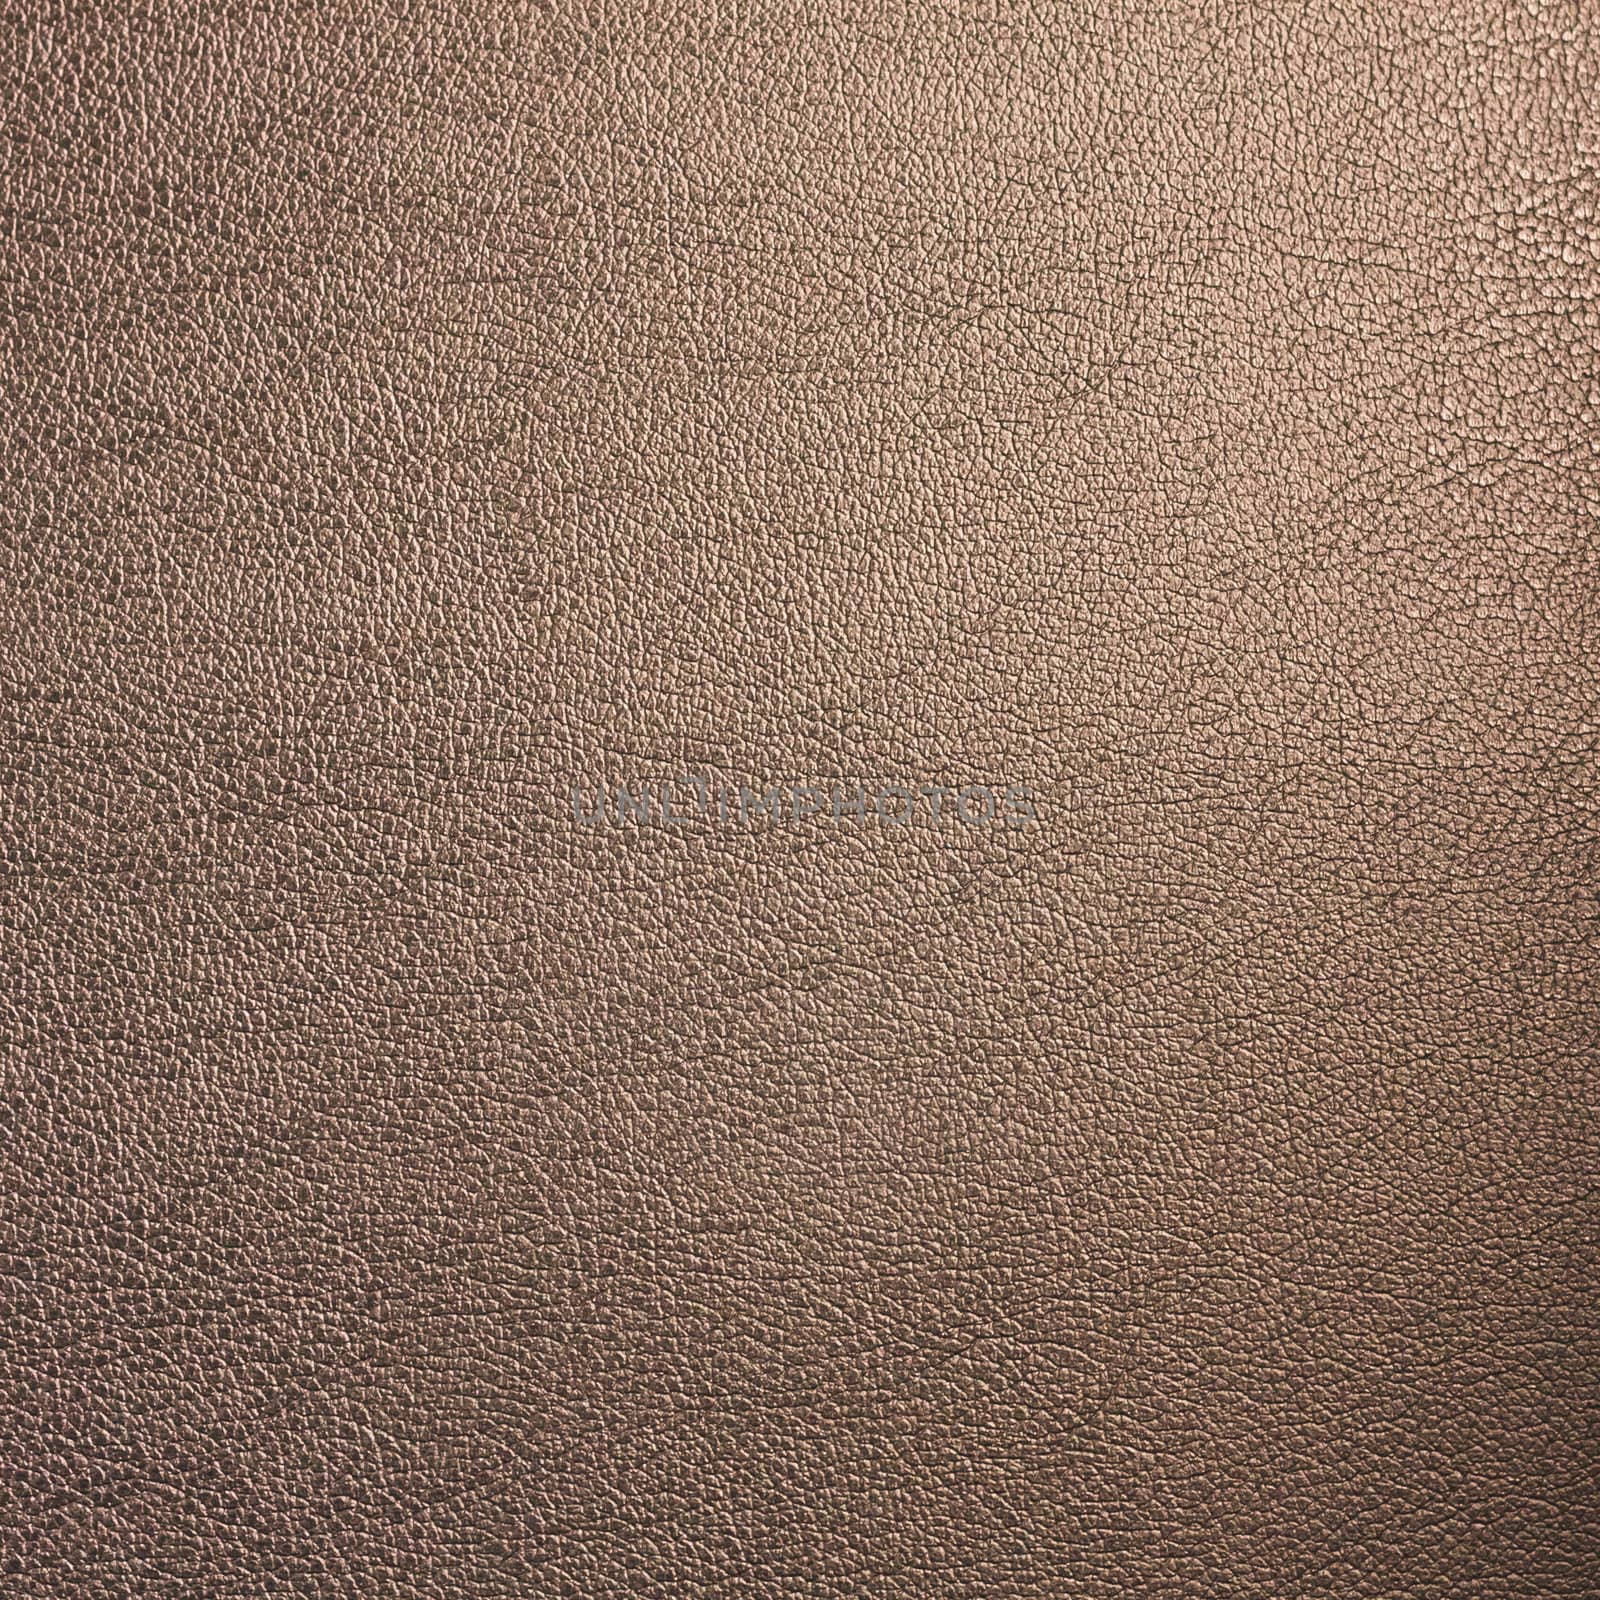 leather texture for background by ryhor